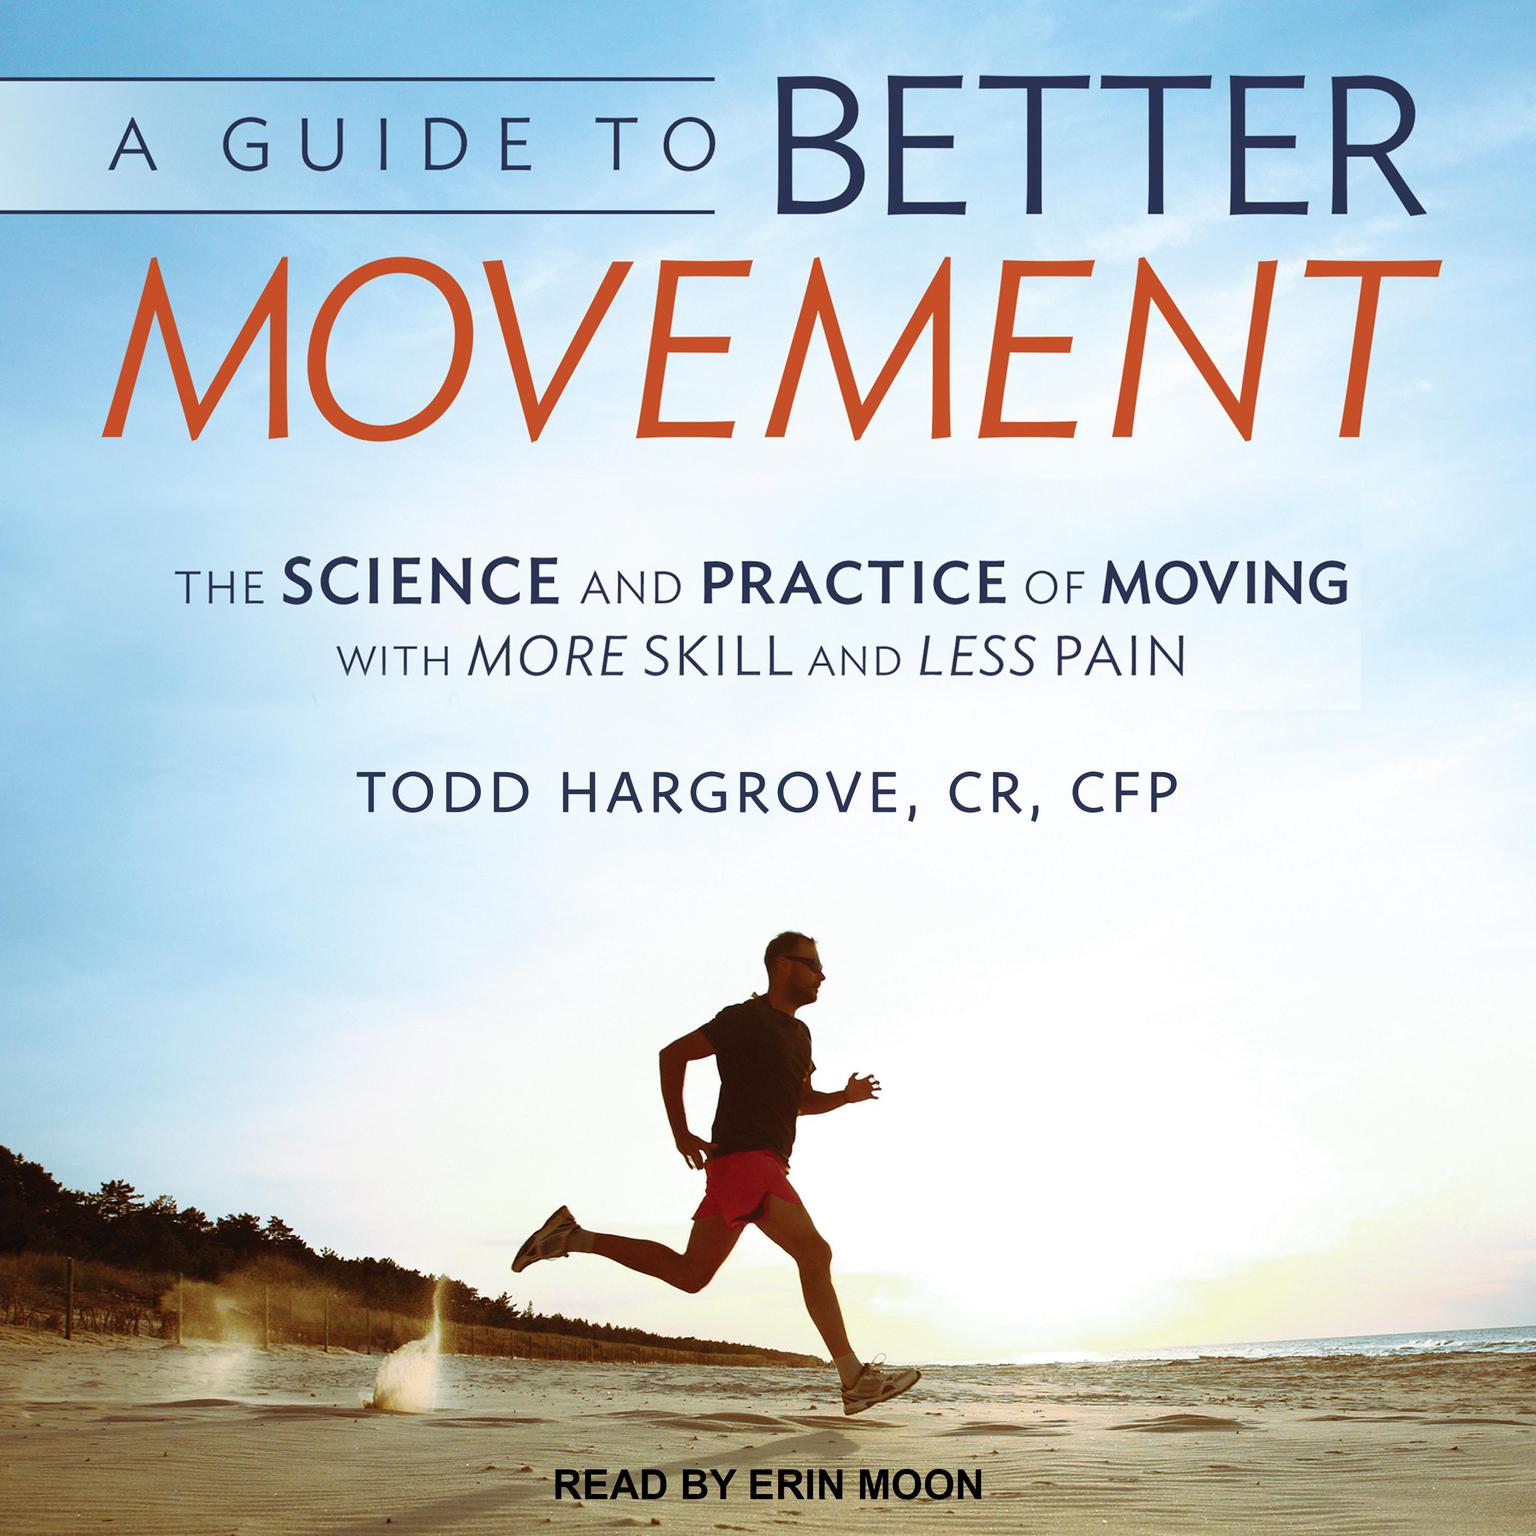 A Guide to Better Movement: The Science and Practice of Moving With More Skill and Less Pain Audiobook, by Todd Hargrove